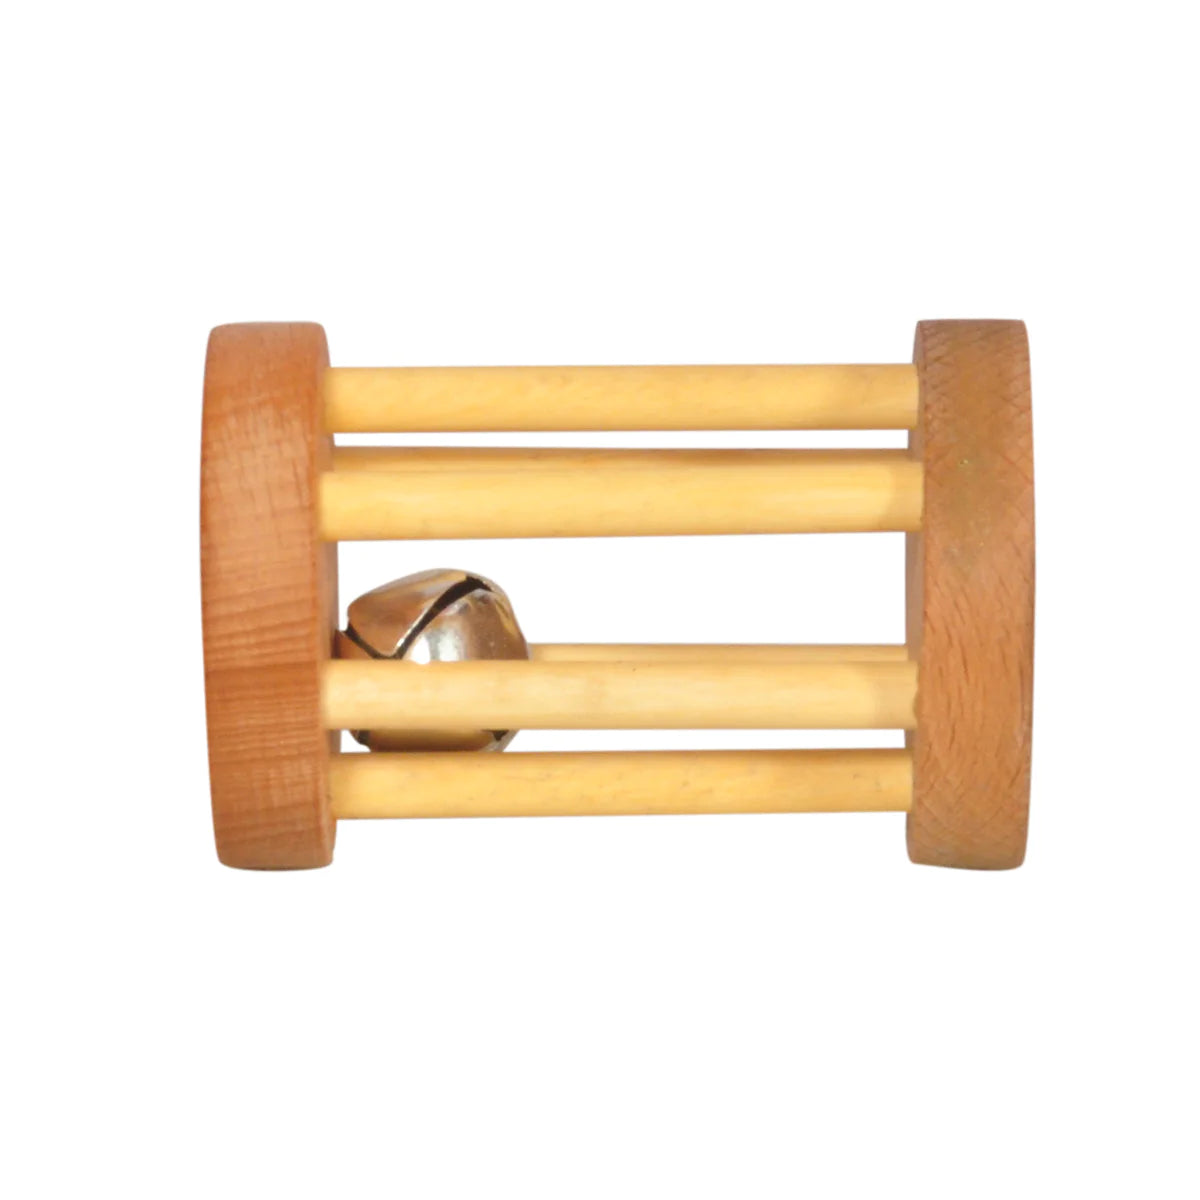 Buy Thasvi Montessori Baby Set With Rolling Ball And Disc - SkilloToys.com